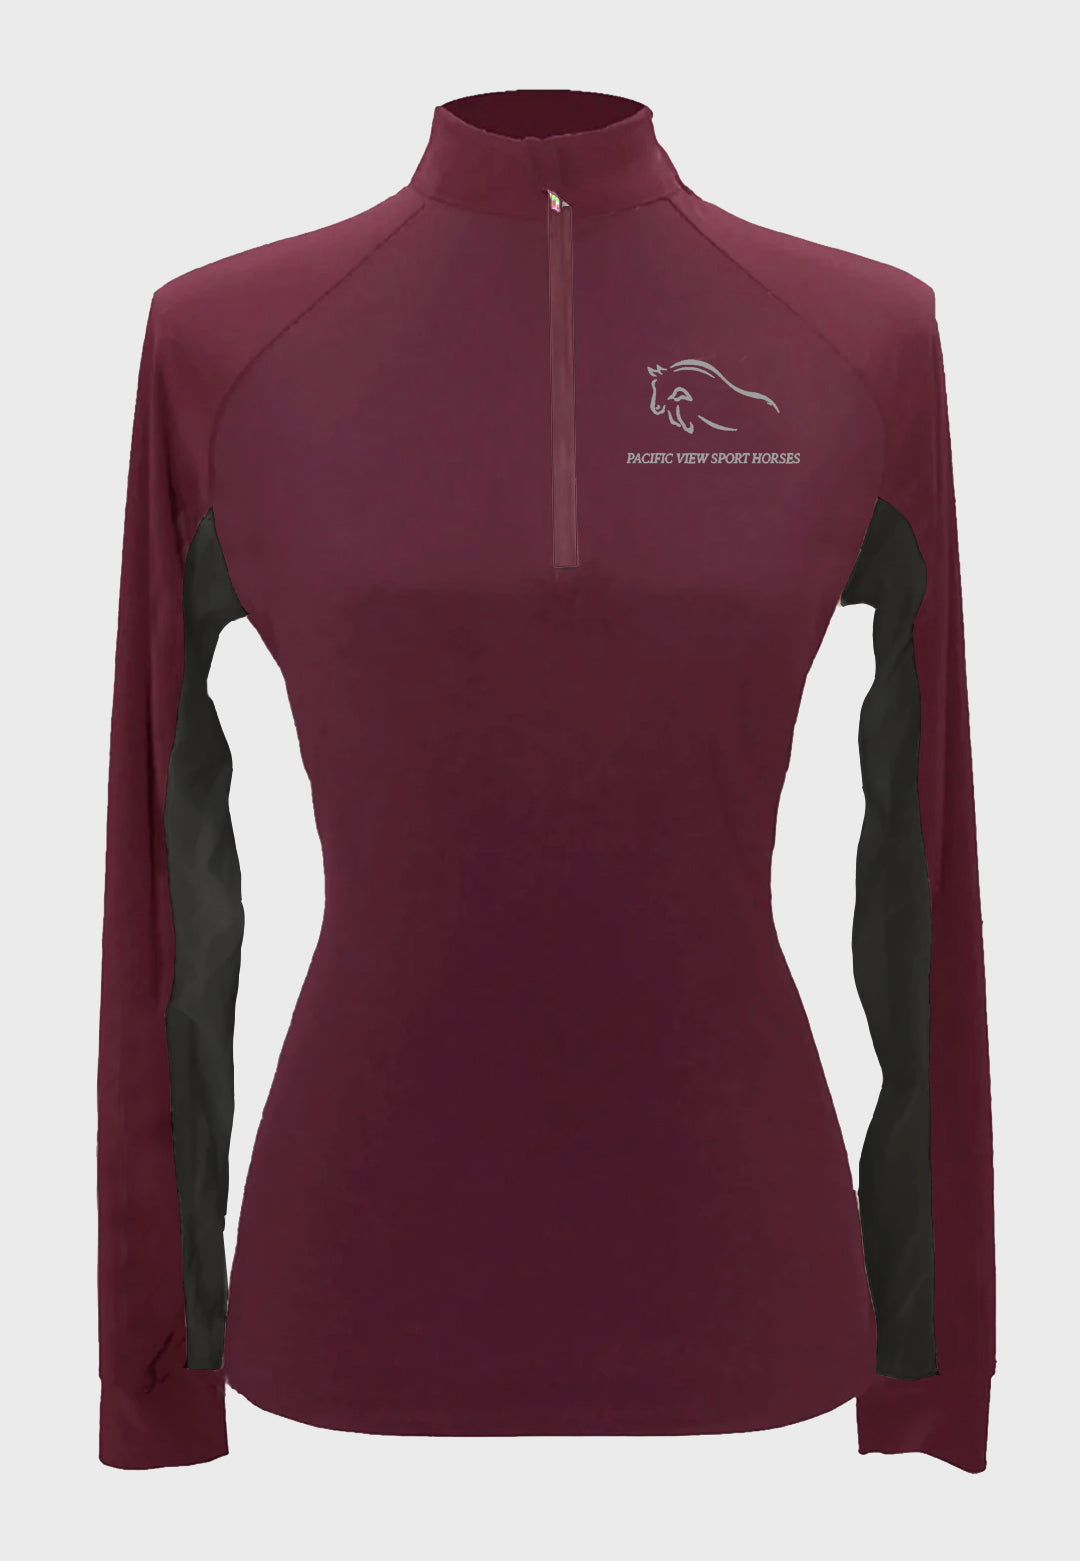 Pacific View Sport Horses Custom Maroon Long-Sleeve Sun Shirt, Adult + Youth Sizes